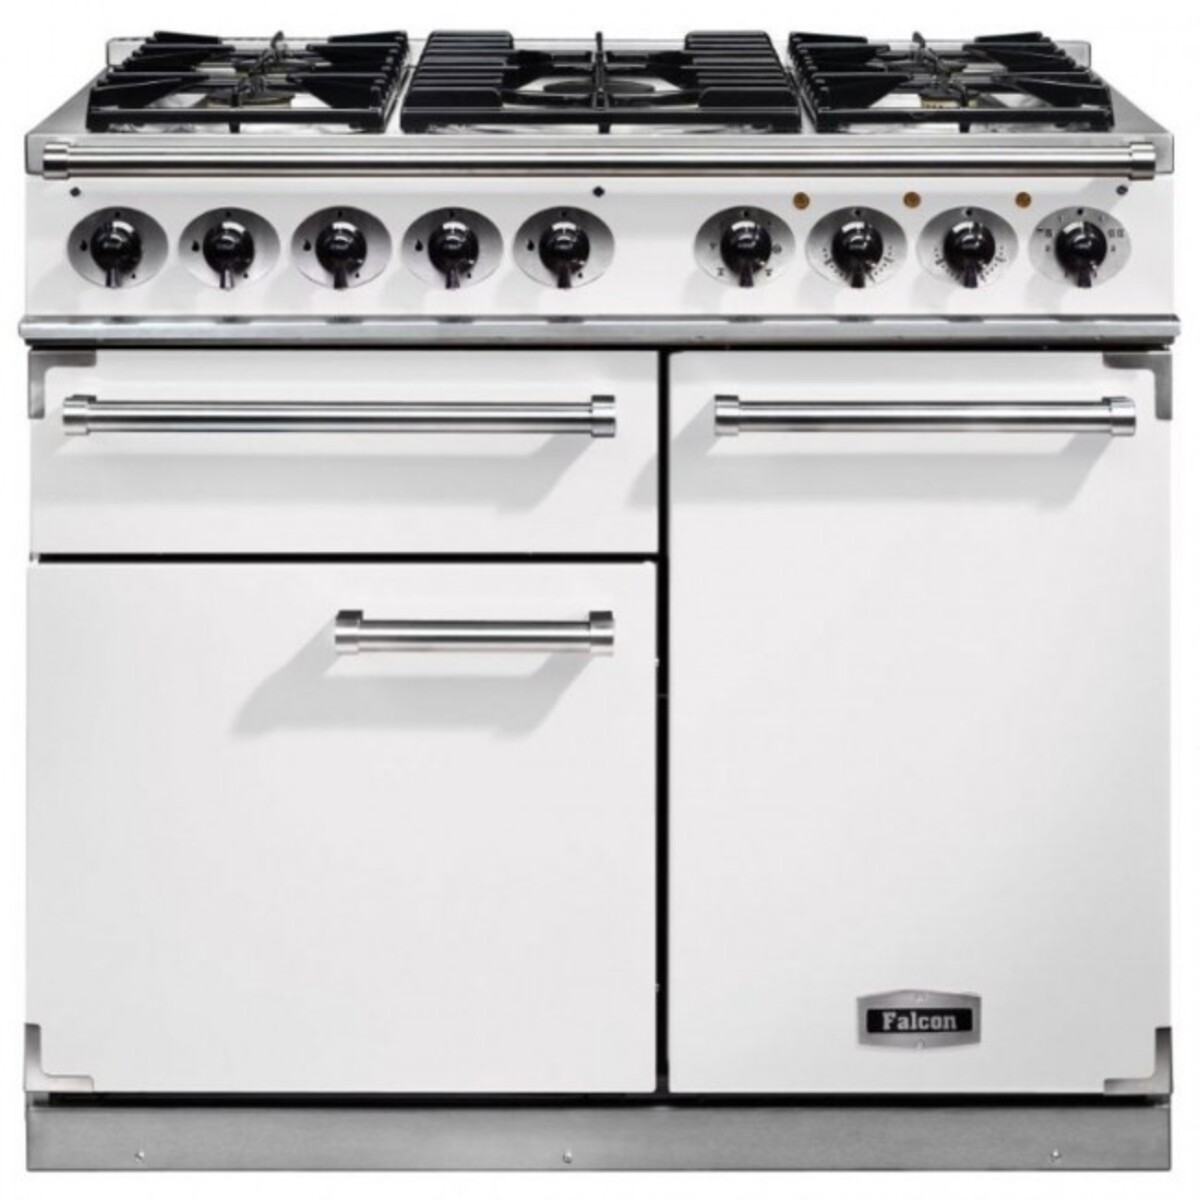 FALCON F1000DXDFWHNM 98650 - 100cm Deluxe Range Cooker, White Finish